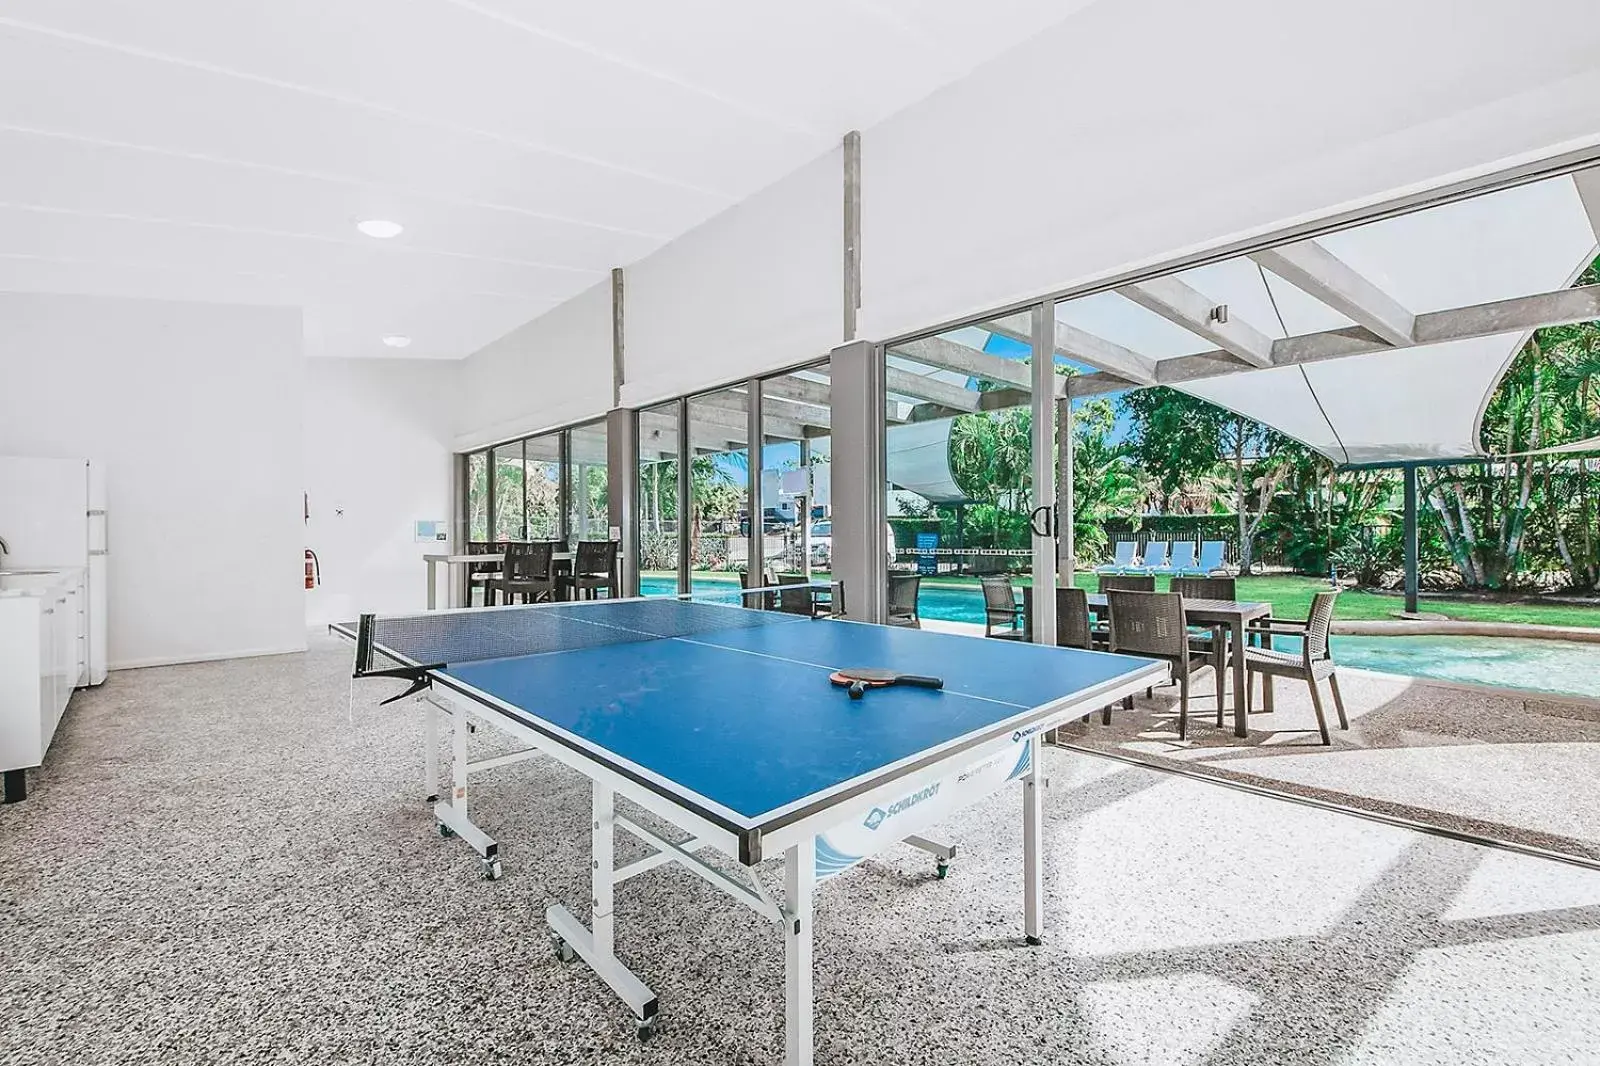 Game Room, Swimming Pool in Beaches on Lammermoor Apartments